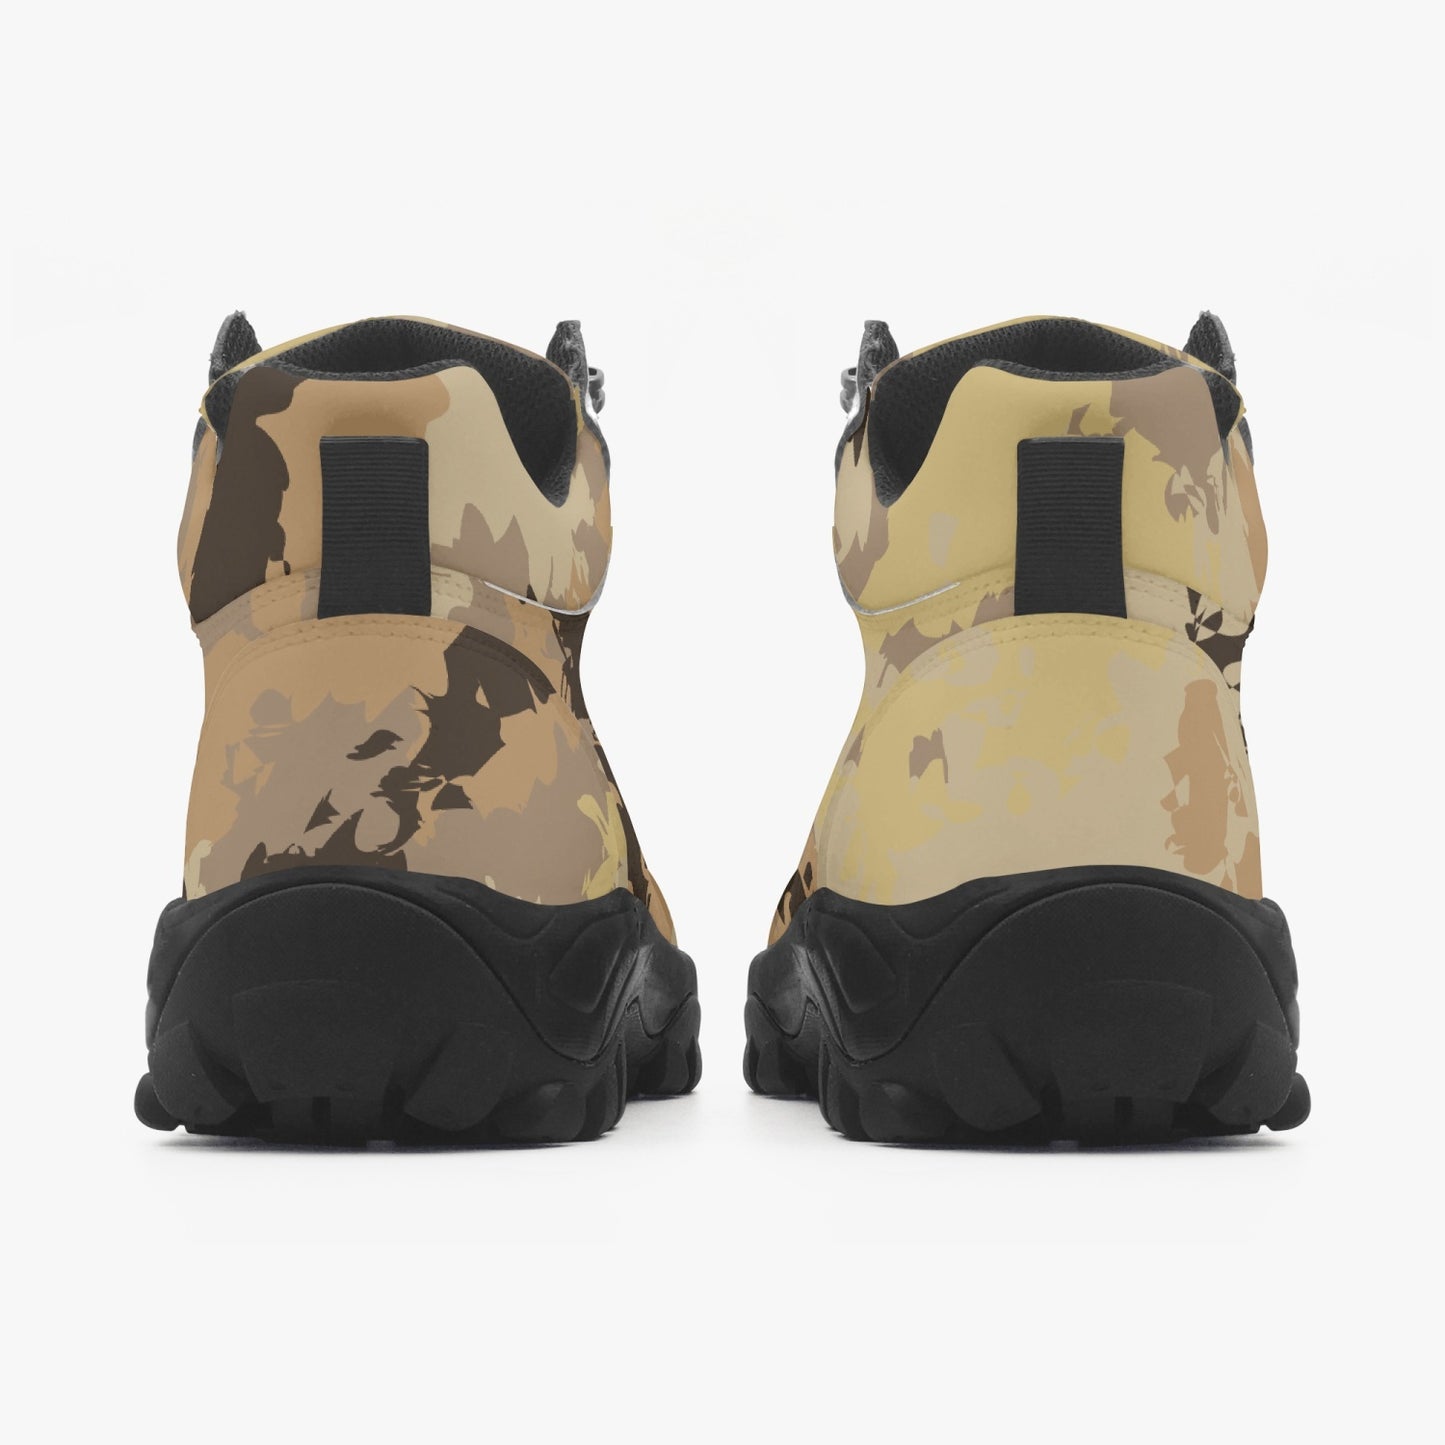 Kicxs Camouflage Classic Boots - Tan